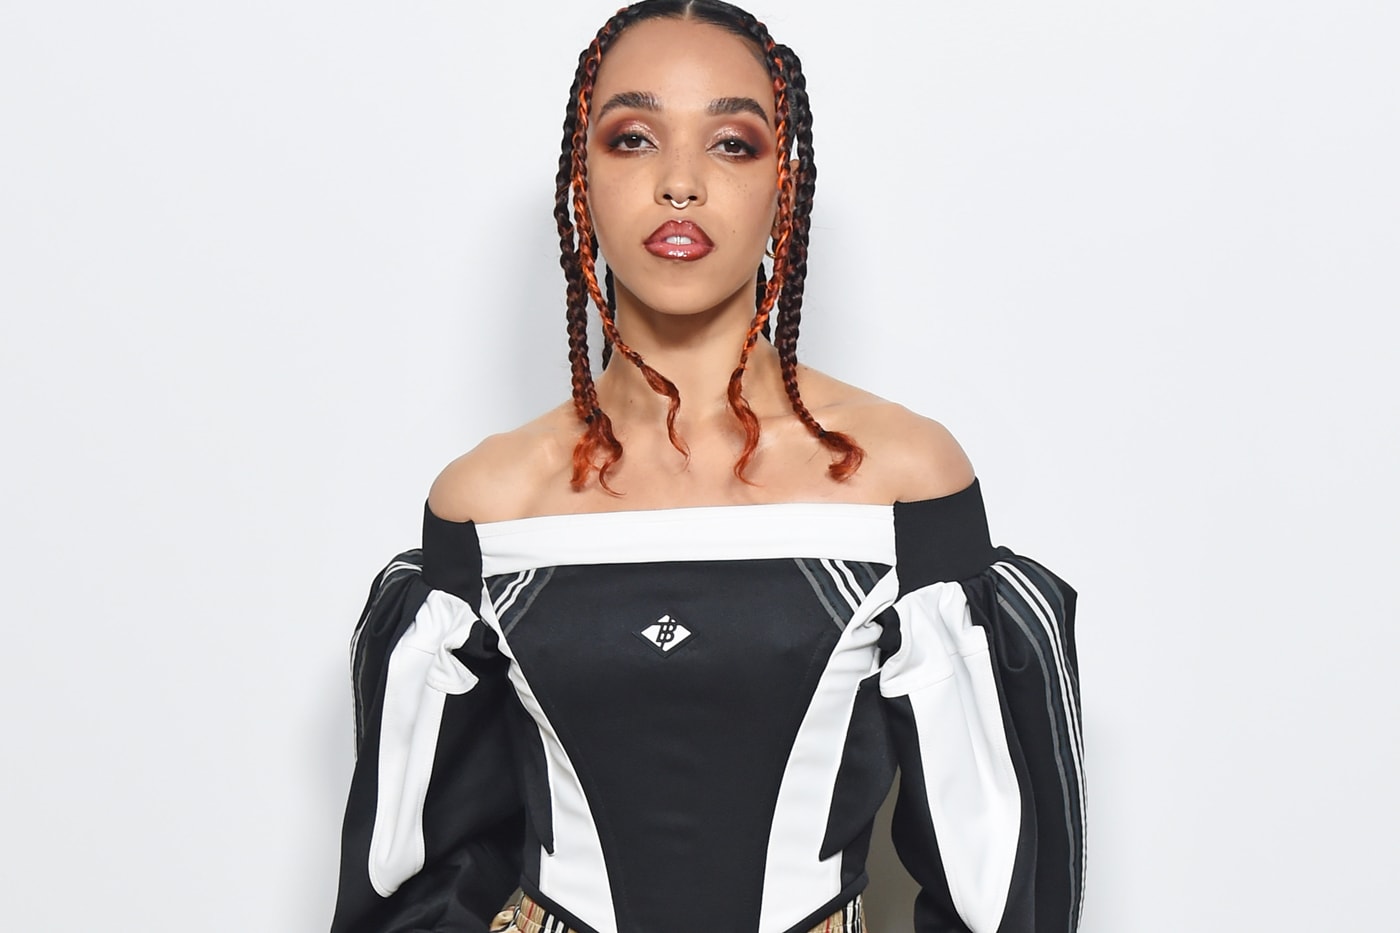 FKA twigs Releases New Song and Video, "Good To Love"